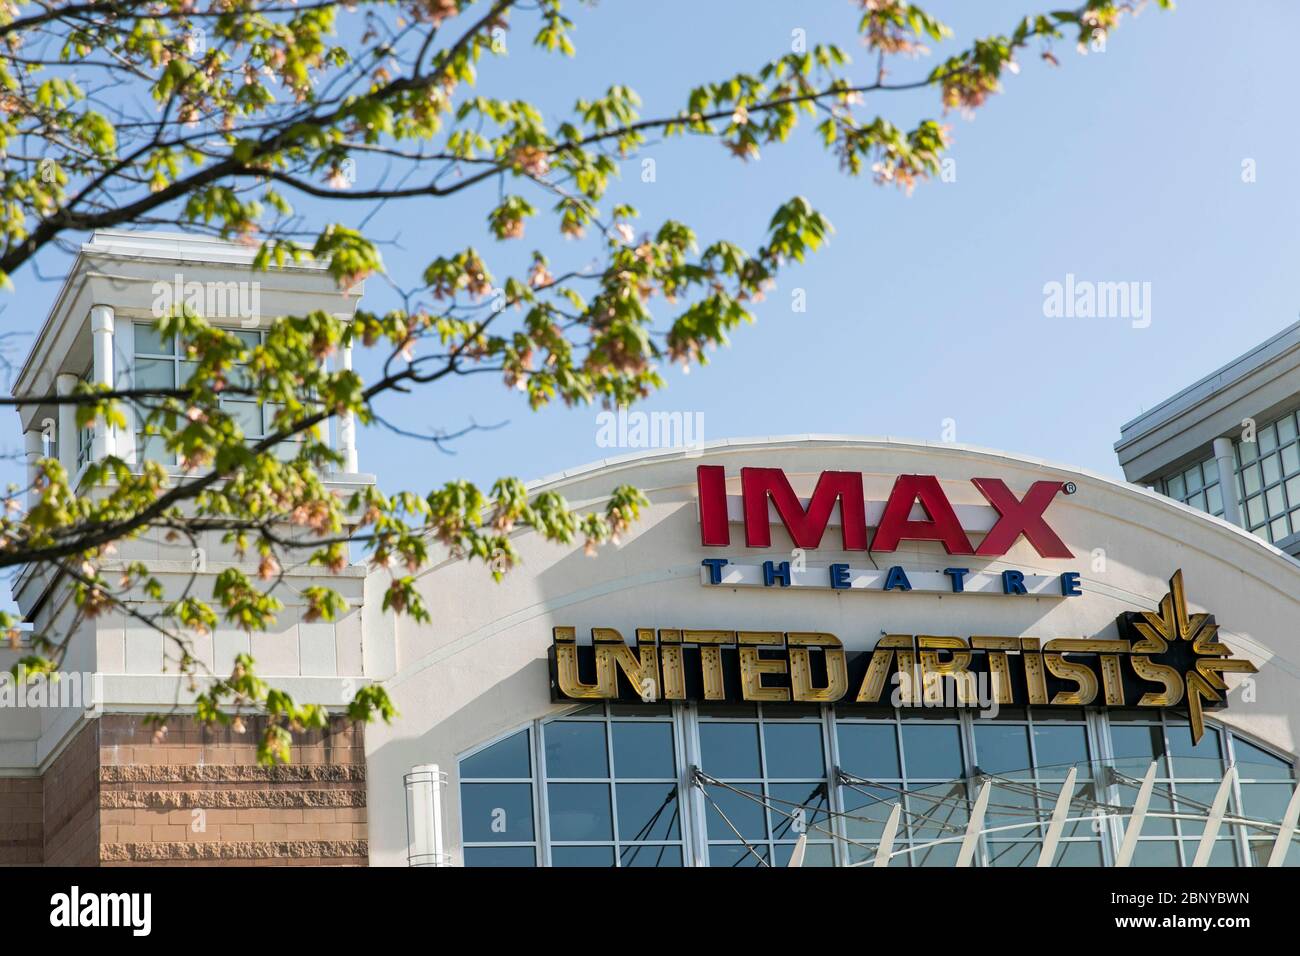 A logo sign outside of a United Artists movie theater location in King of Prussia, Pennsylvania on May 4, 2020. Stock Photo